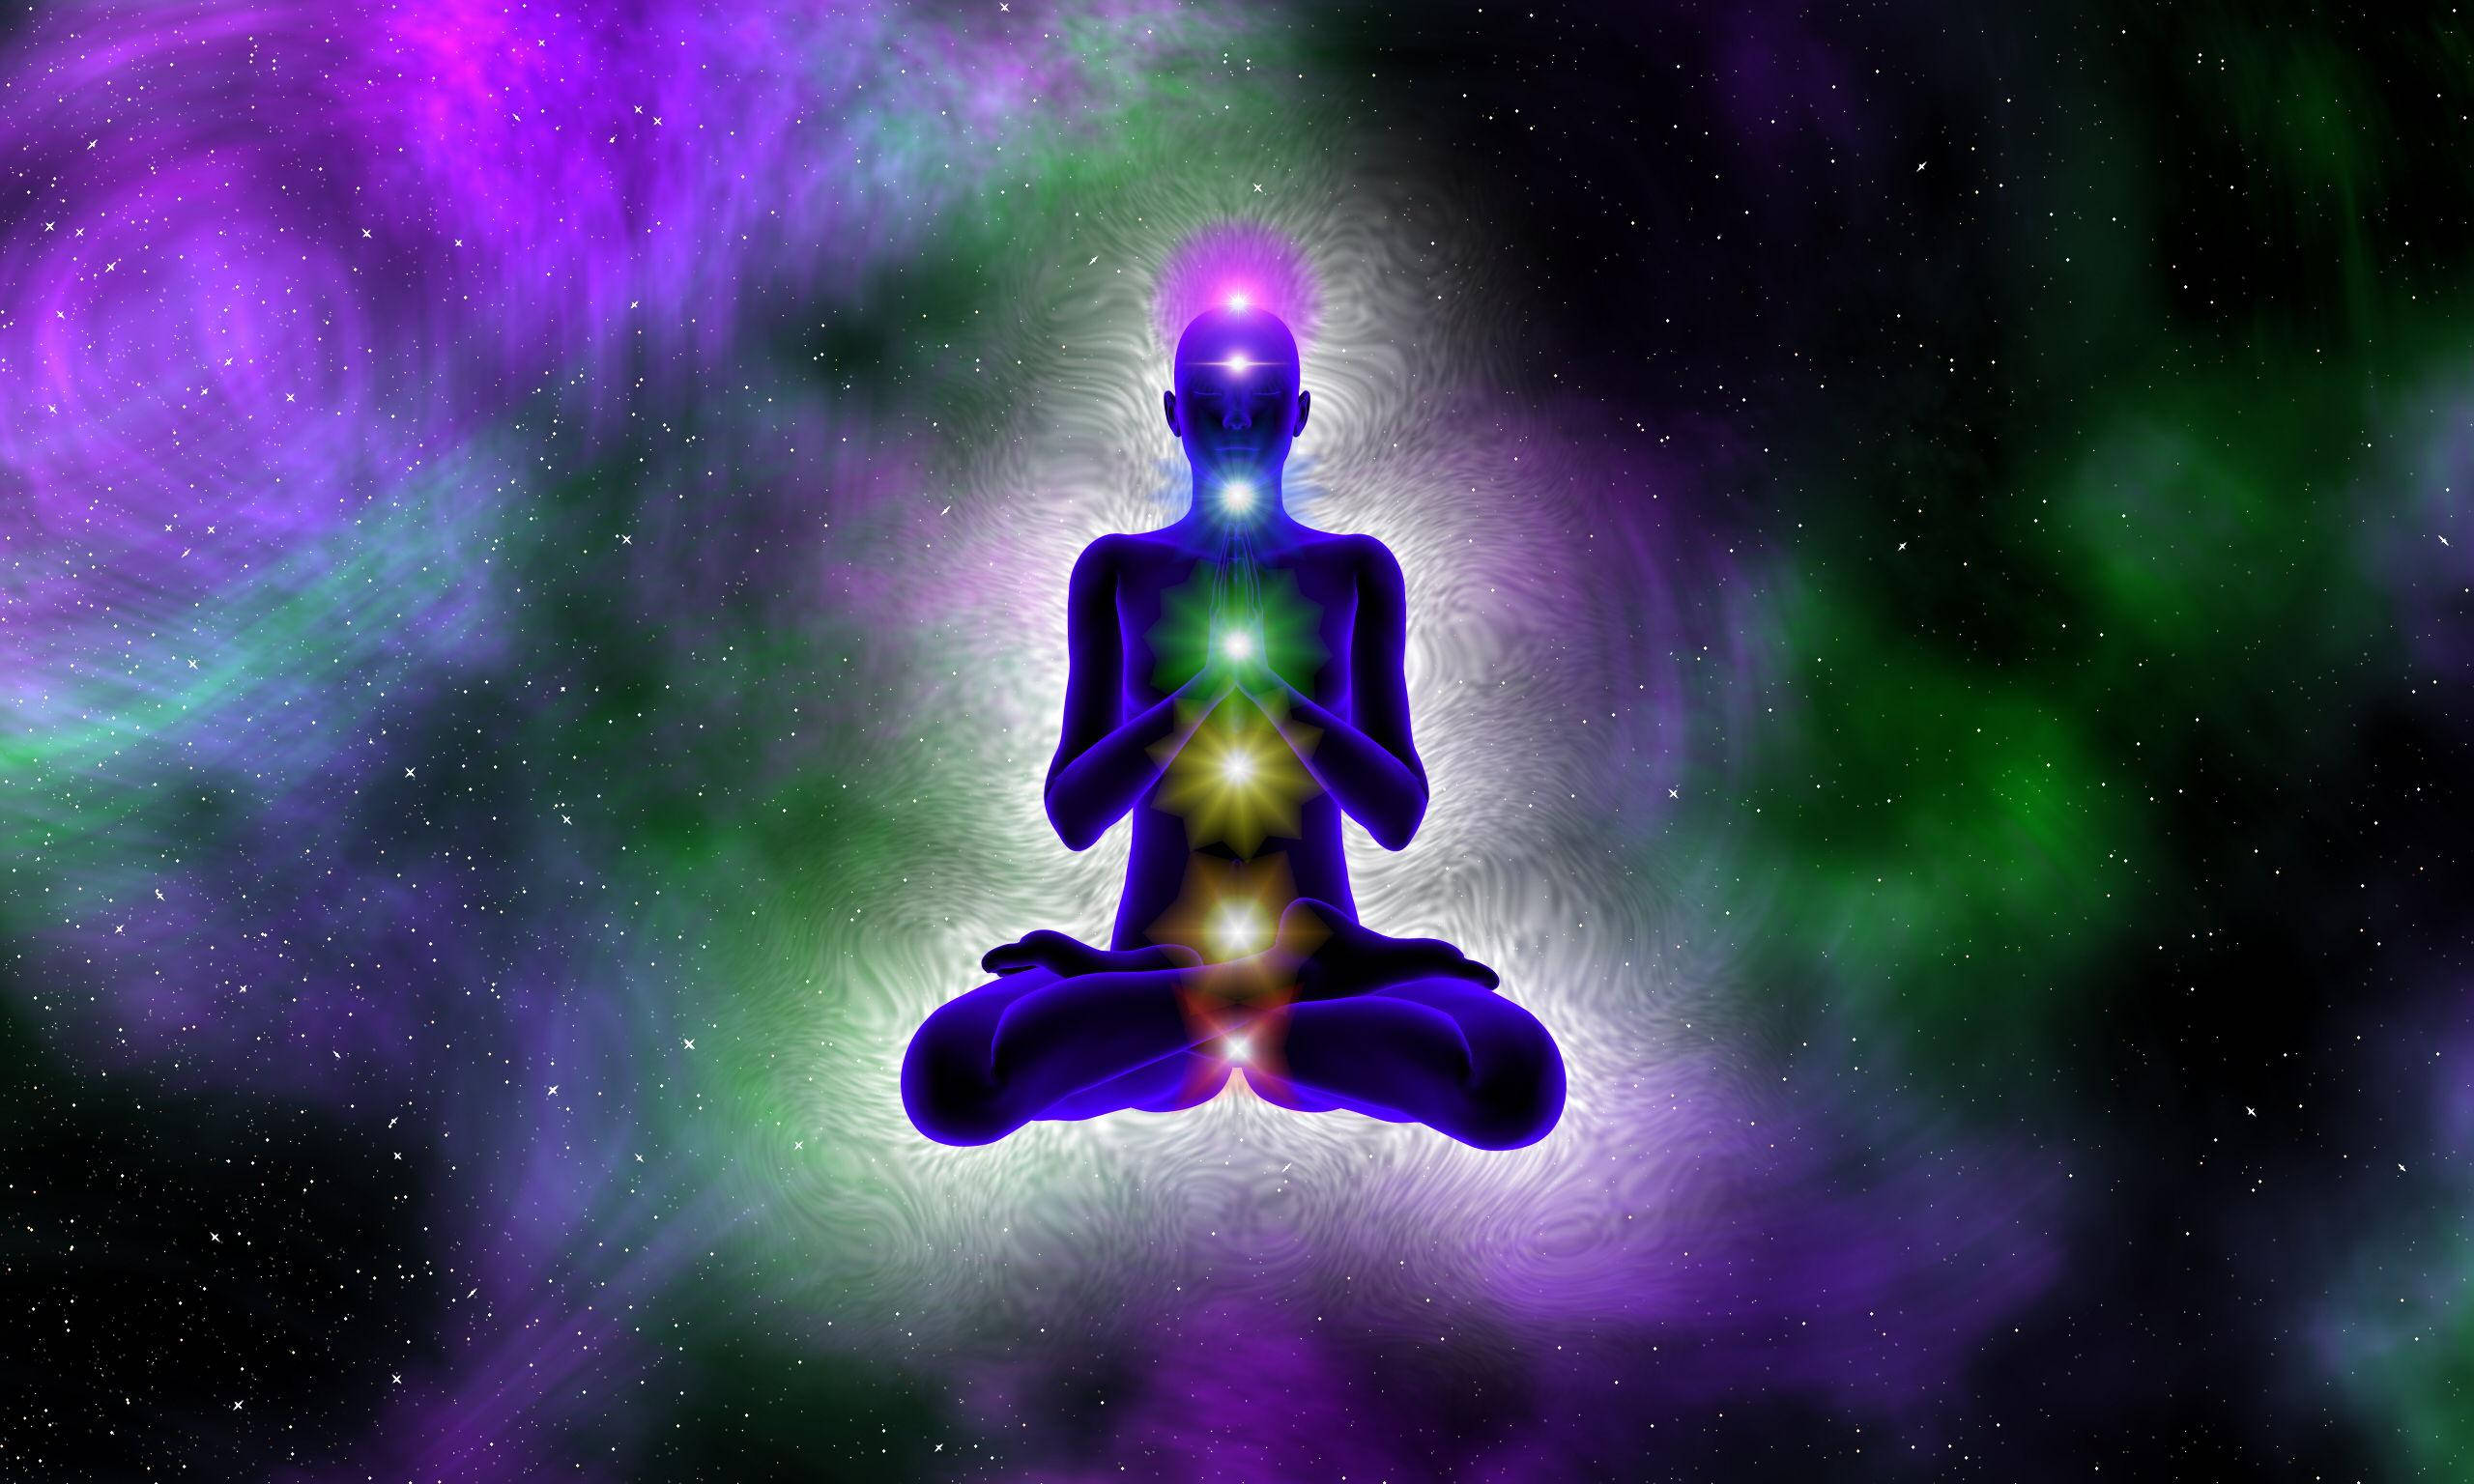 A person in meditation with purple and green light - Spiritual